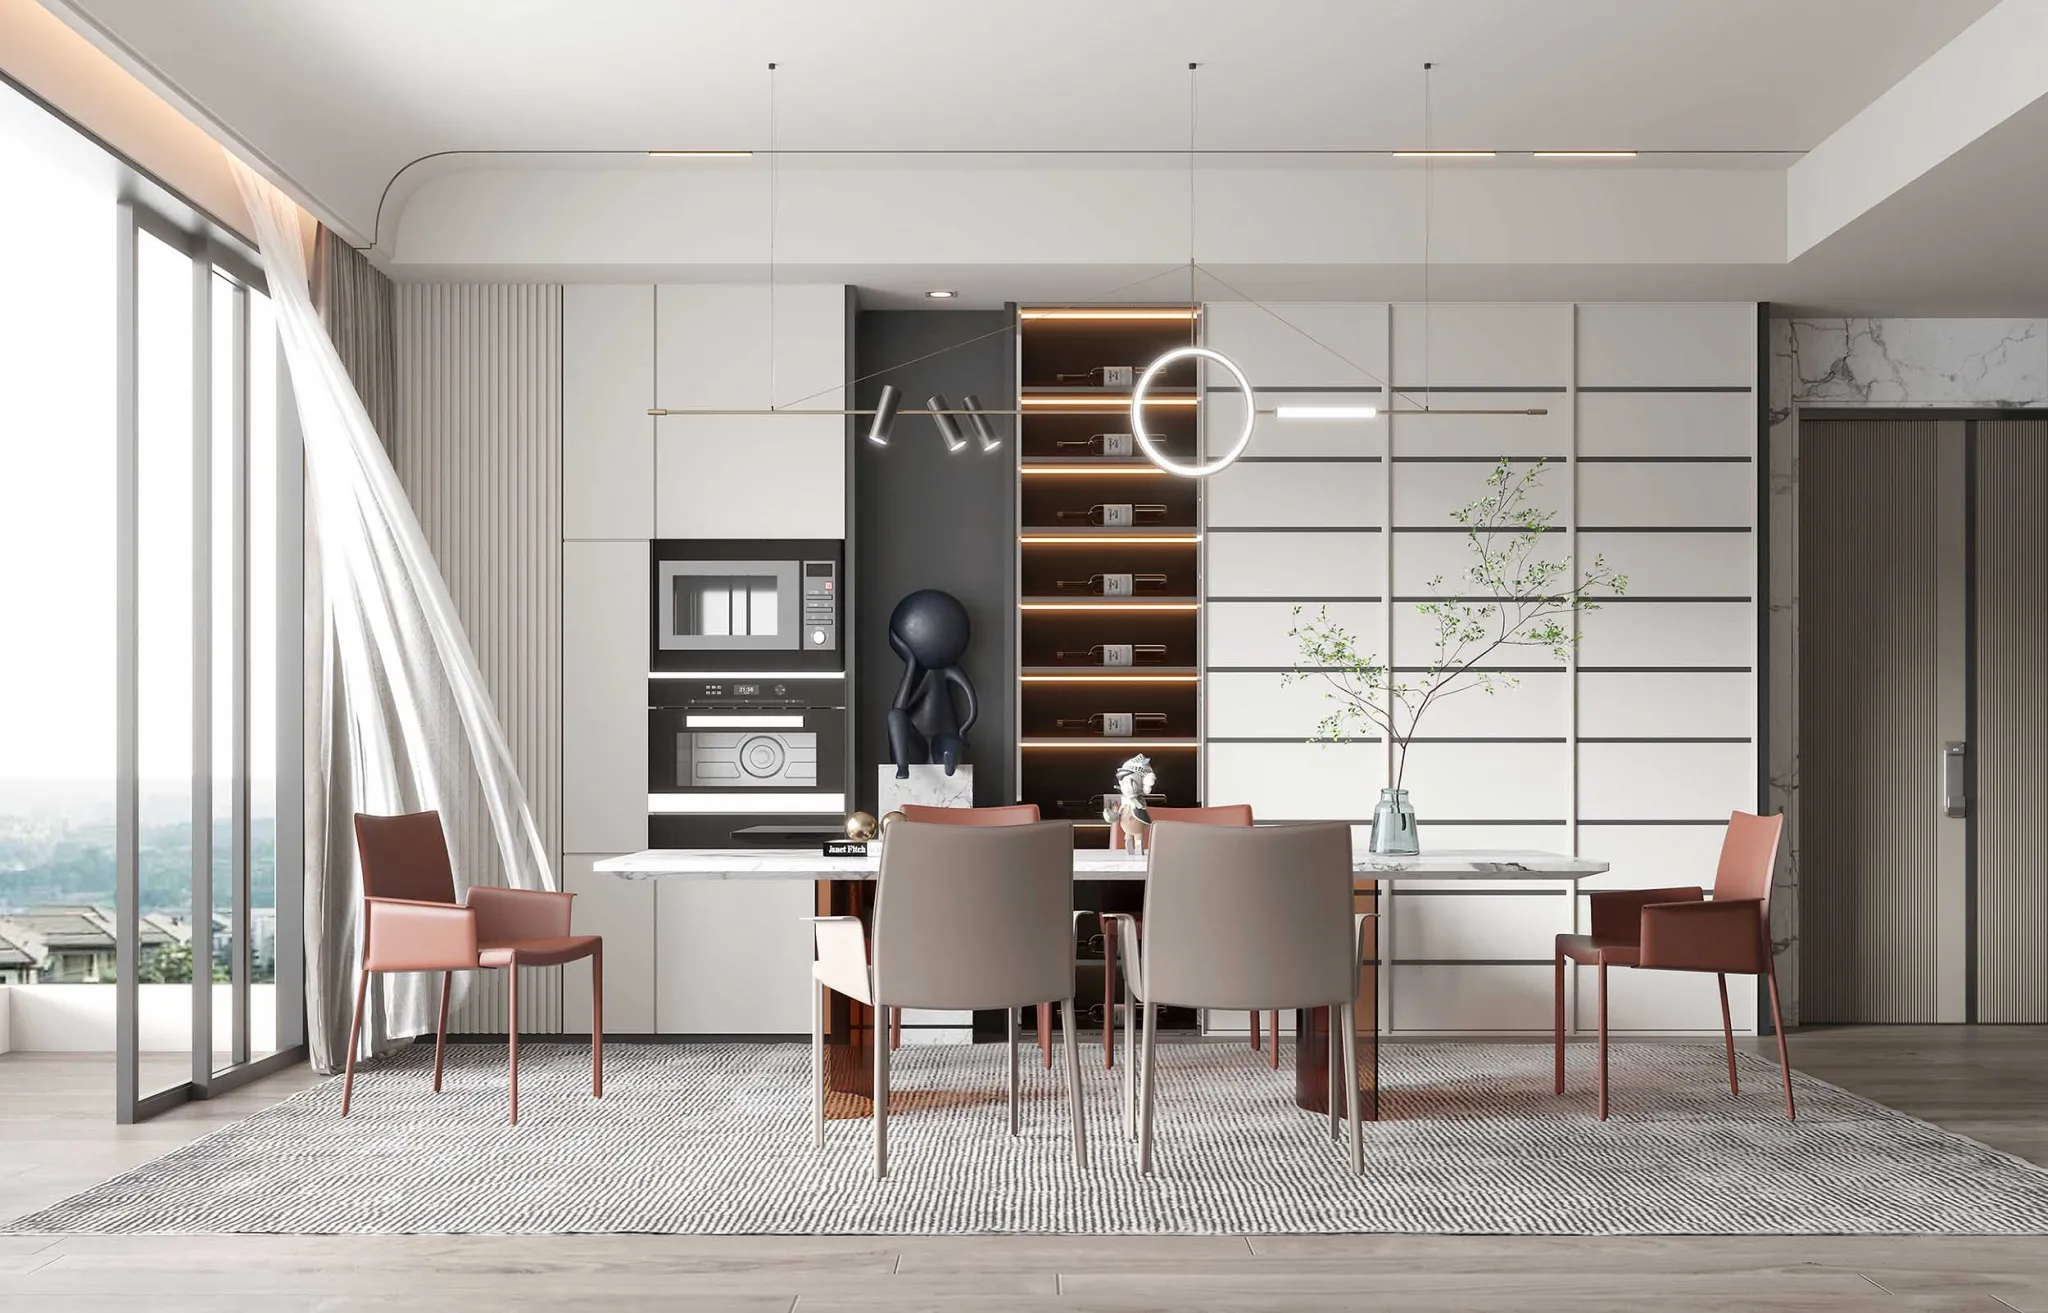 HOUSE SPACE 3D SCENES – DINING ROOM – 0056